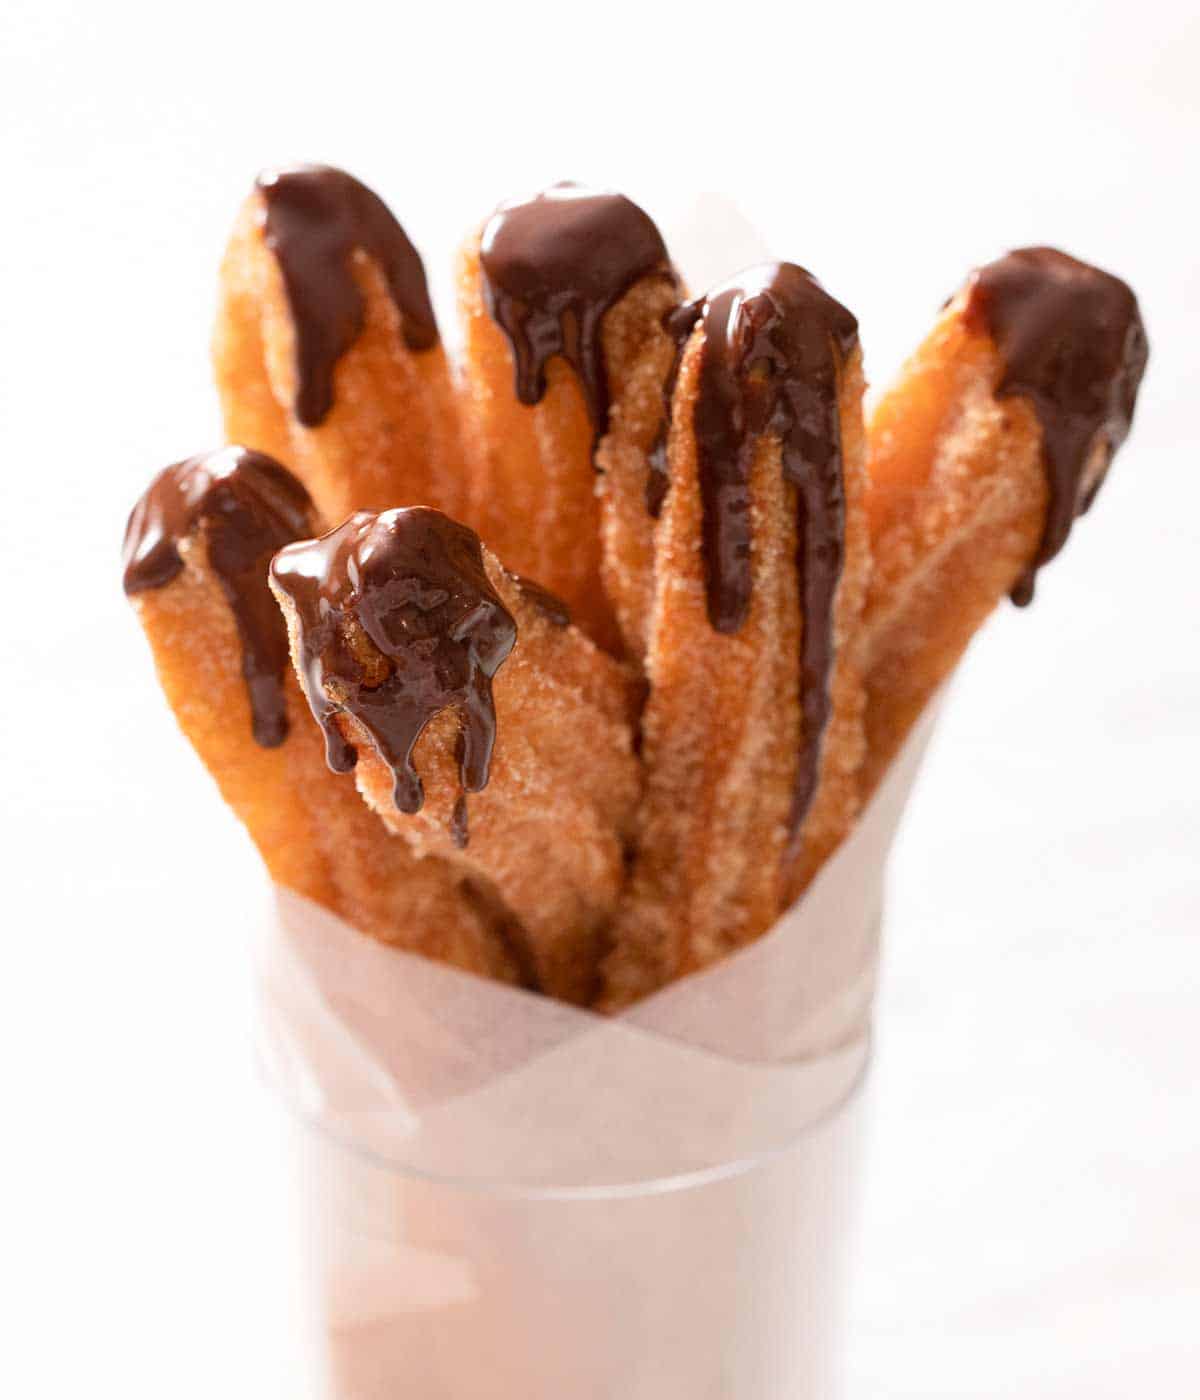 A stack of chocolate dipped churros wrapped in parchment paper